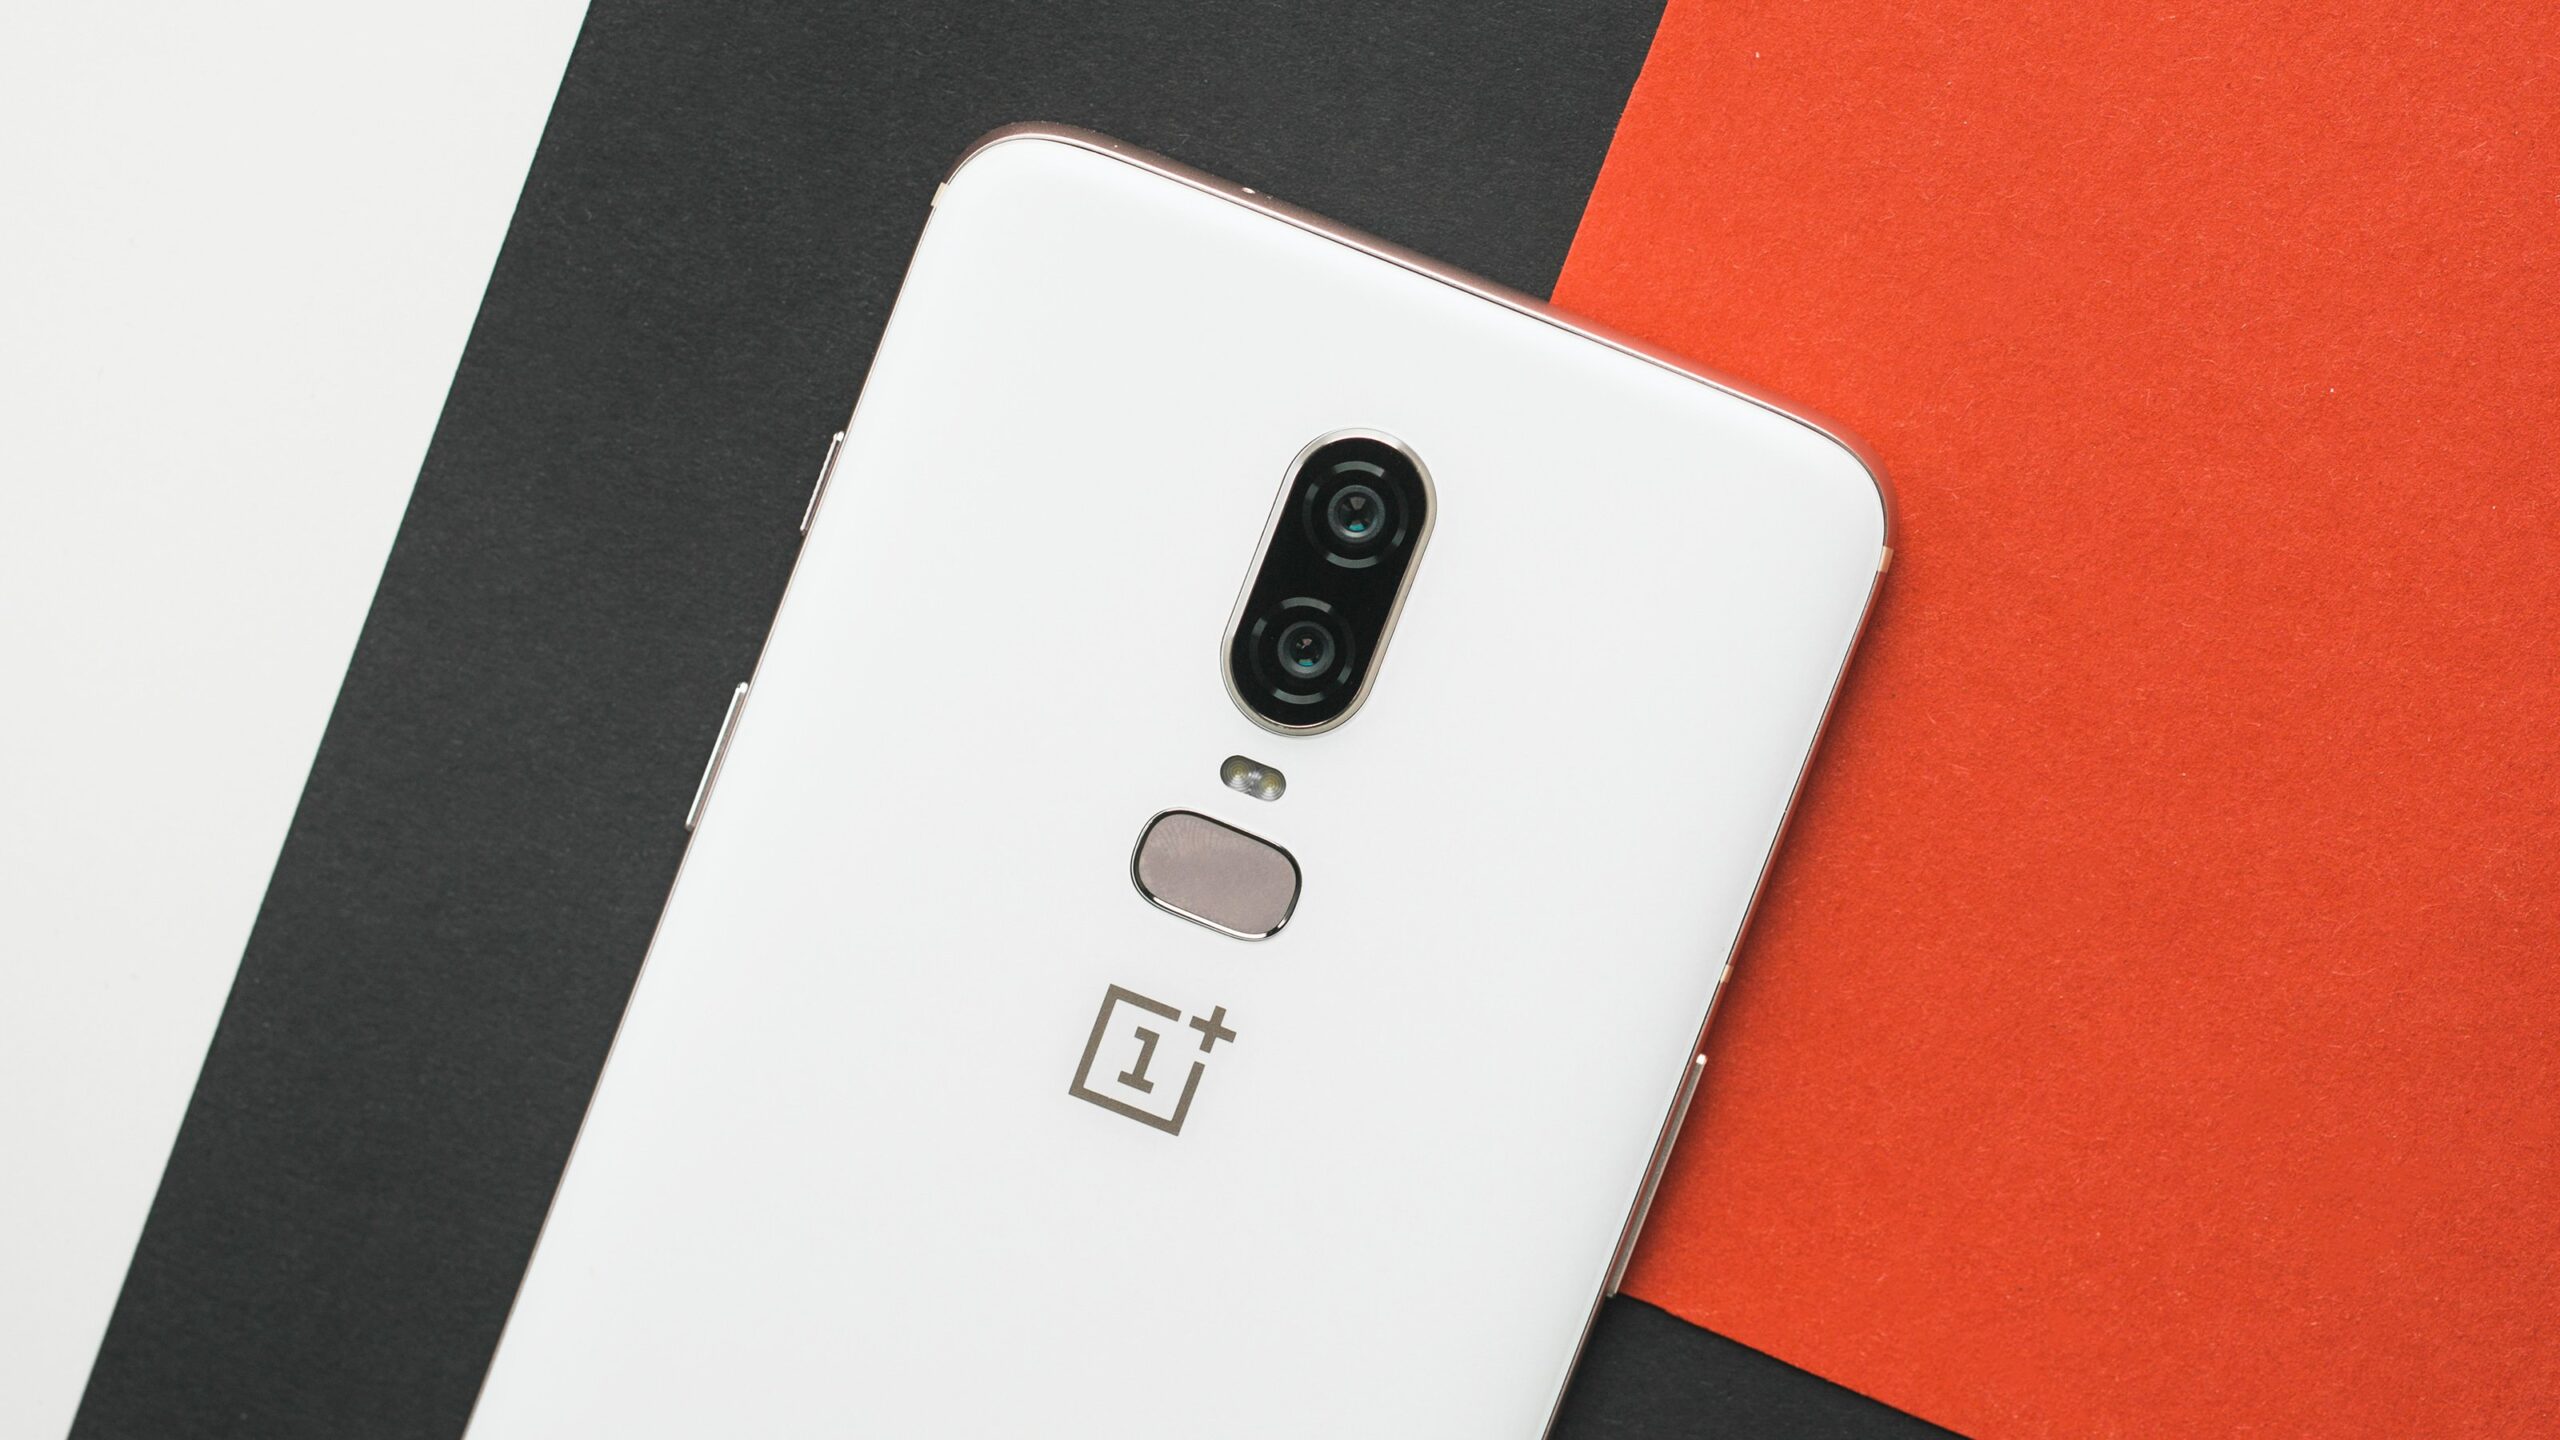 5 great tips for making better use of your OnePlus smartphone